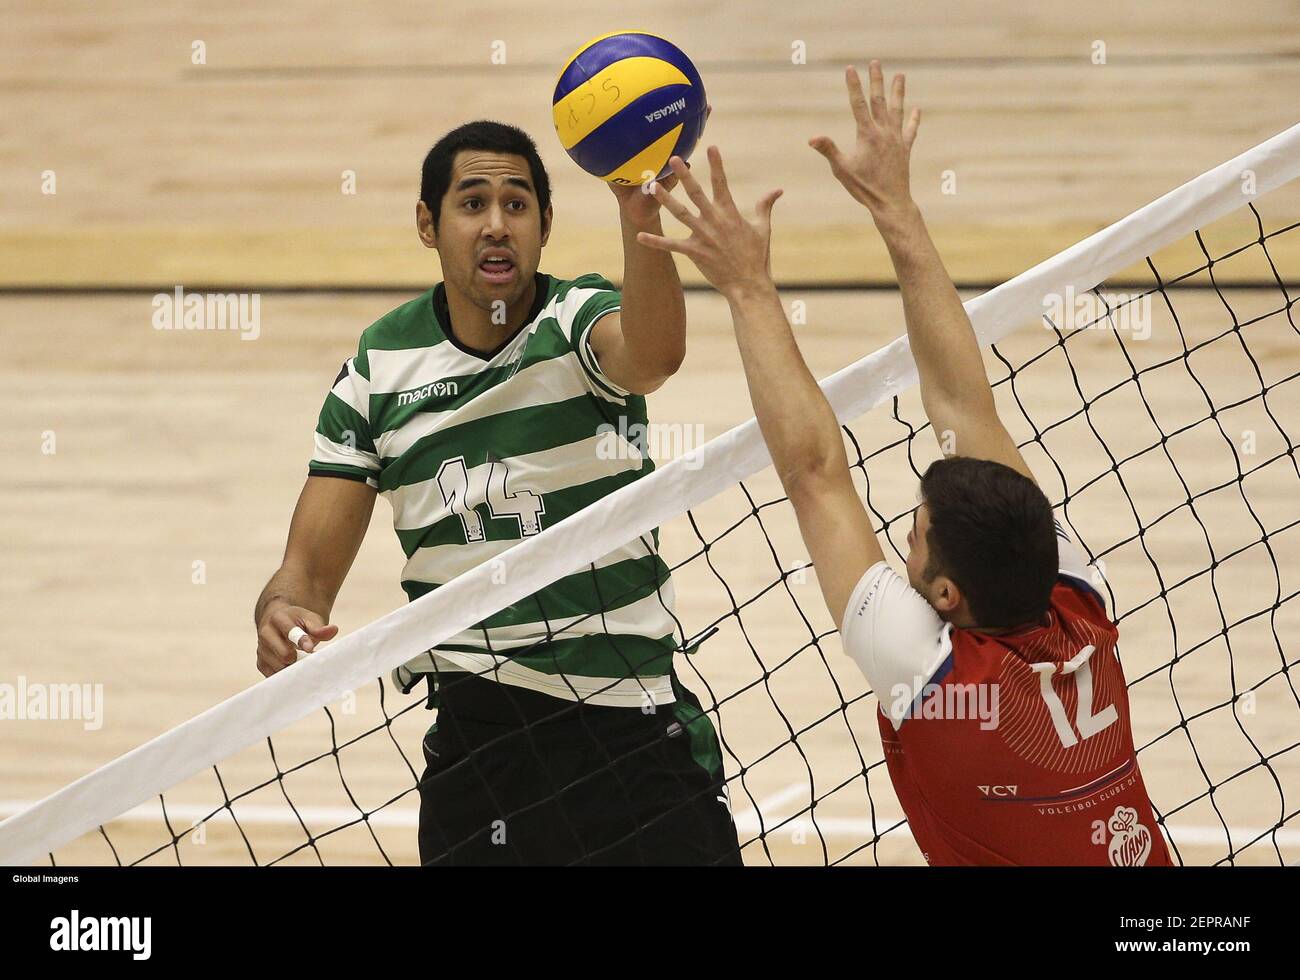 Lisbon, 03/02/2018 - Sporting CP received VC Viana this afternoon at the  João Rocha Pavilion in Lisbon, in a game to count for the 22nd day of the  2017/18 National Volleyball Championship.